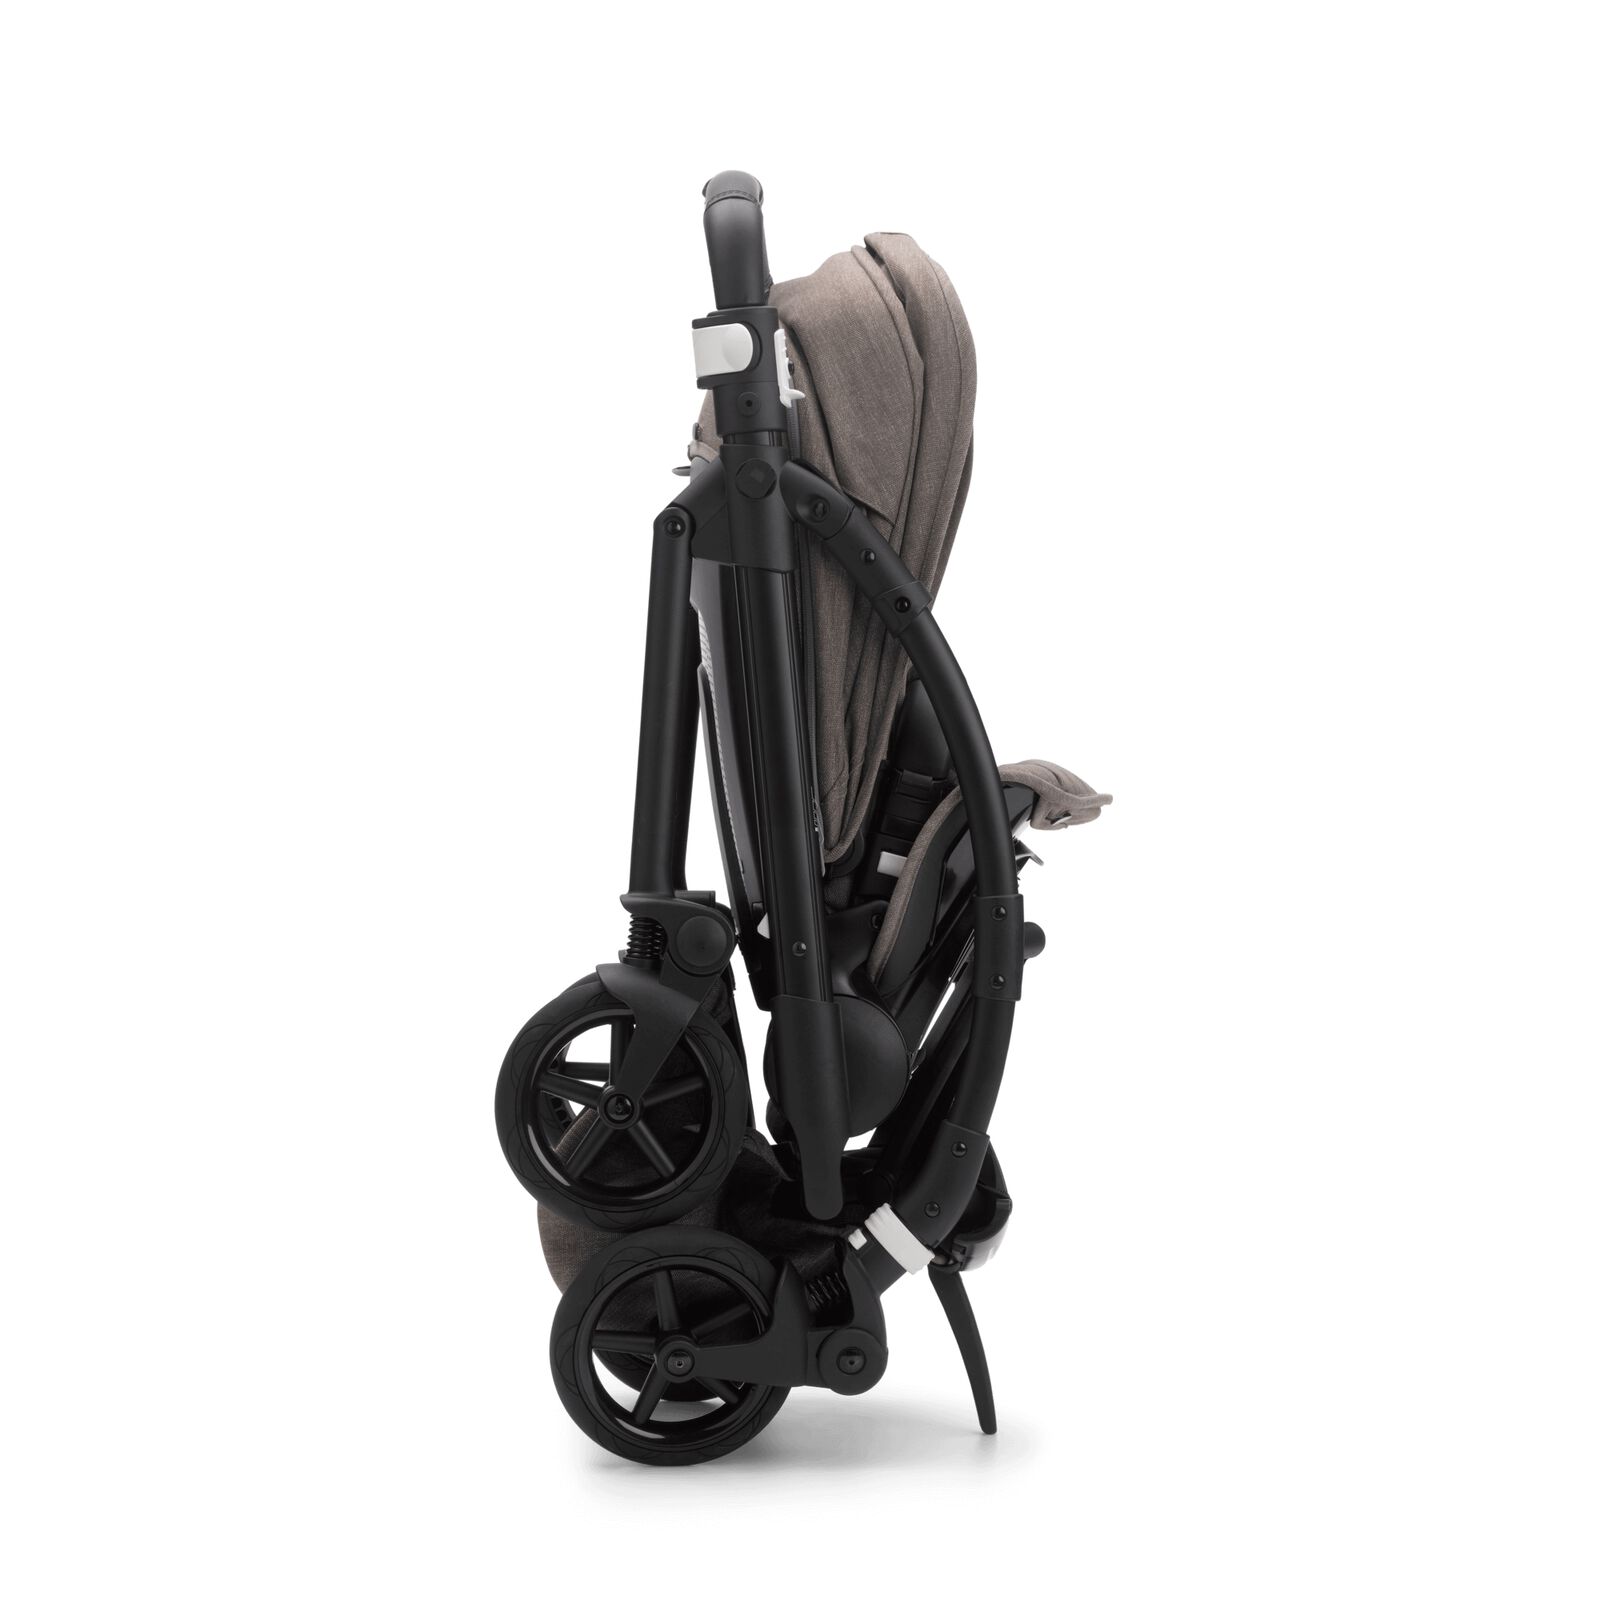 Bugaboo Bee 6 seat stroller mineral taupe mélange sun canopy, mineral taupe mélange fabrics, black base